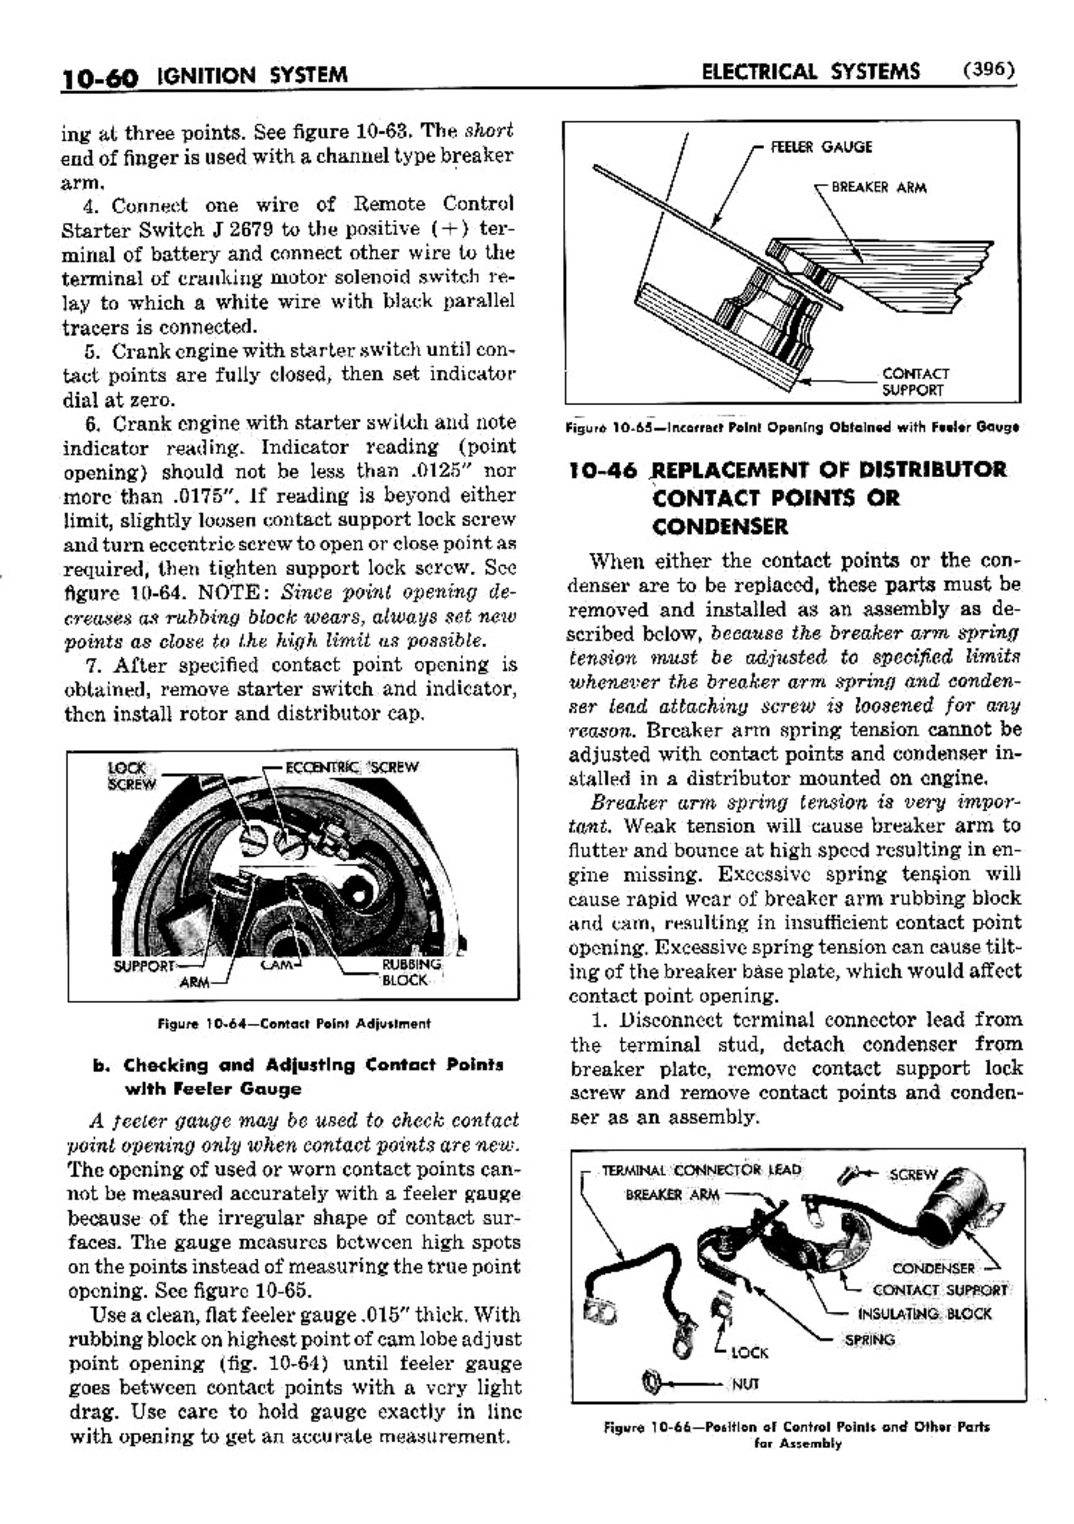 n_11 1952 Buick Shop Manual - Electrical Systems-060-060.jpg